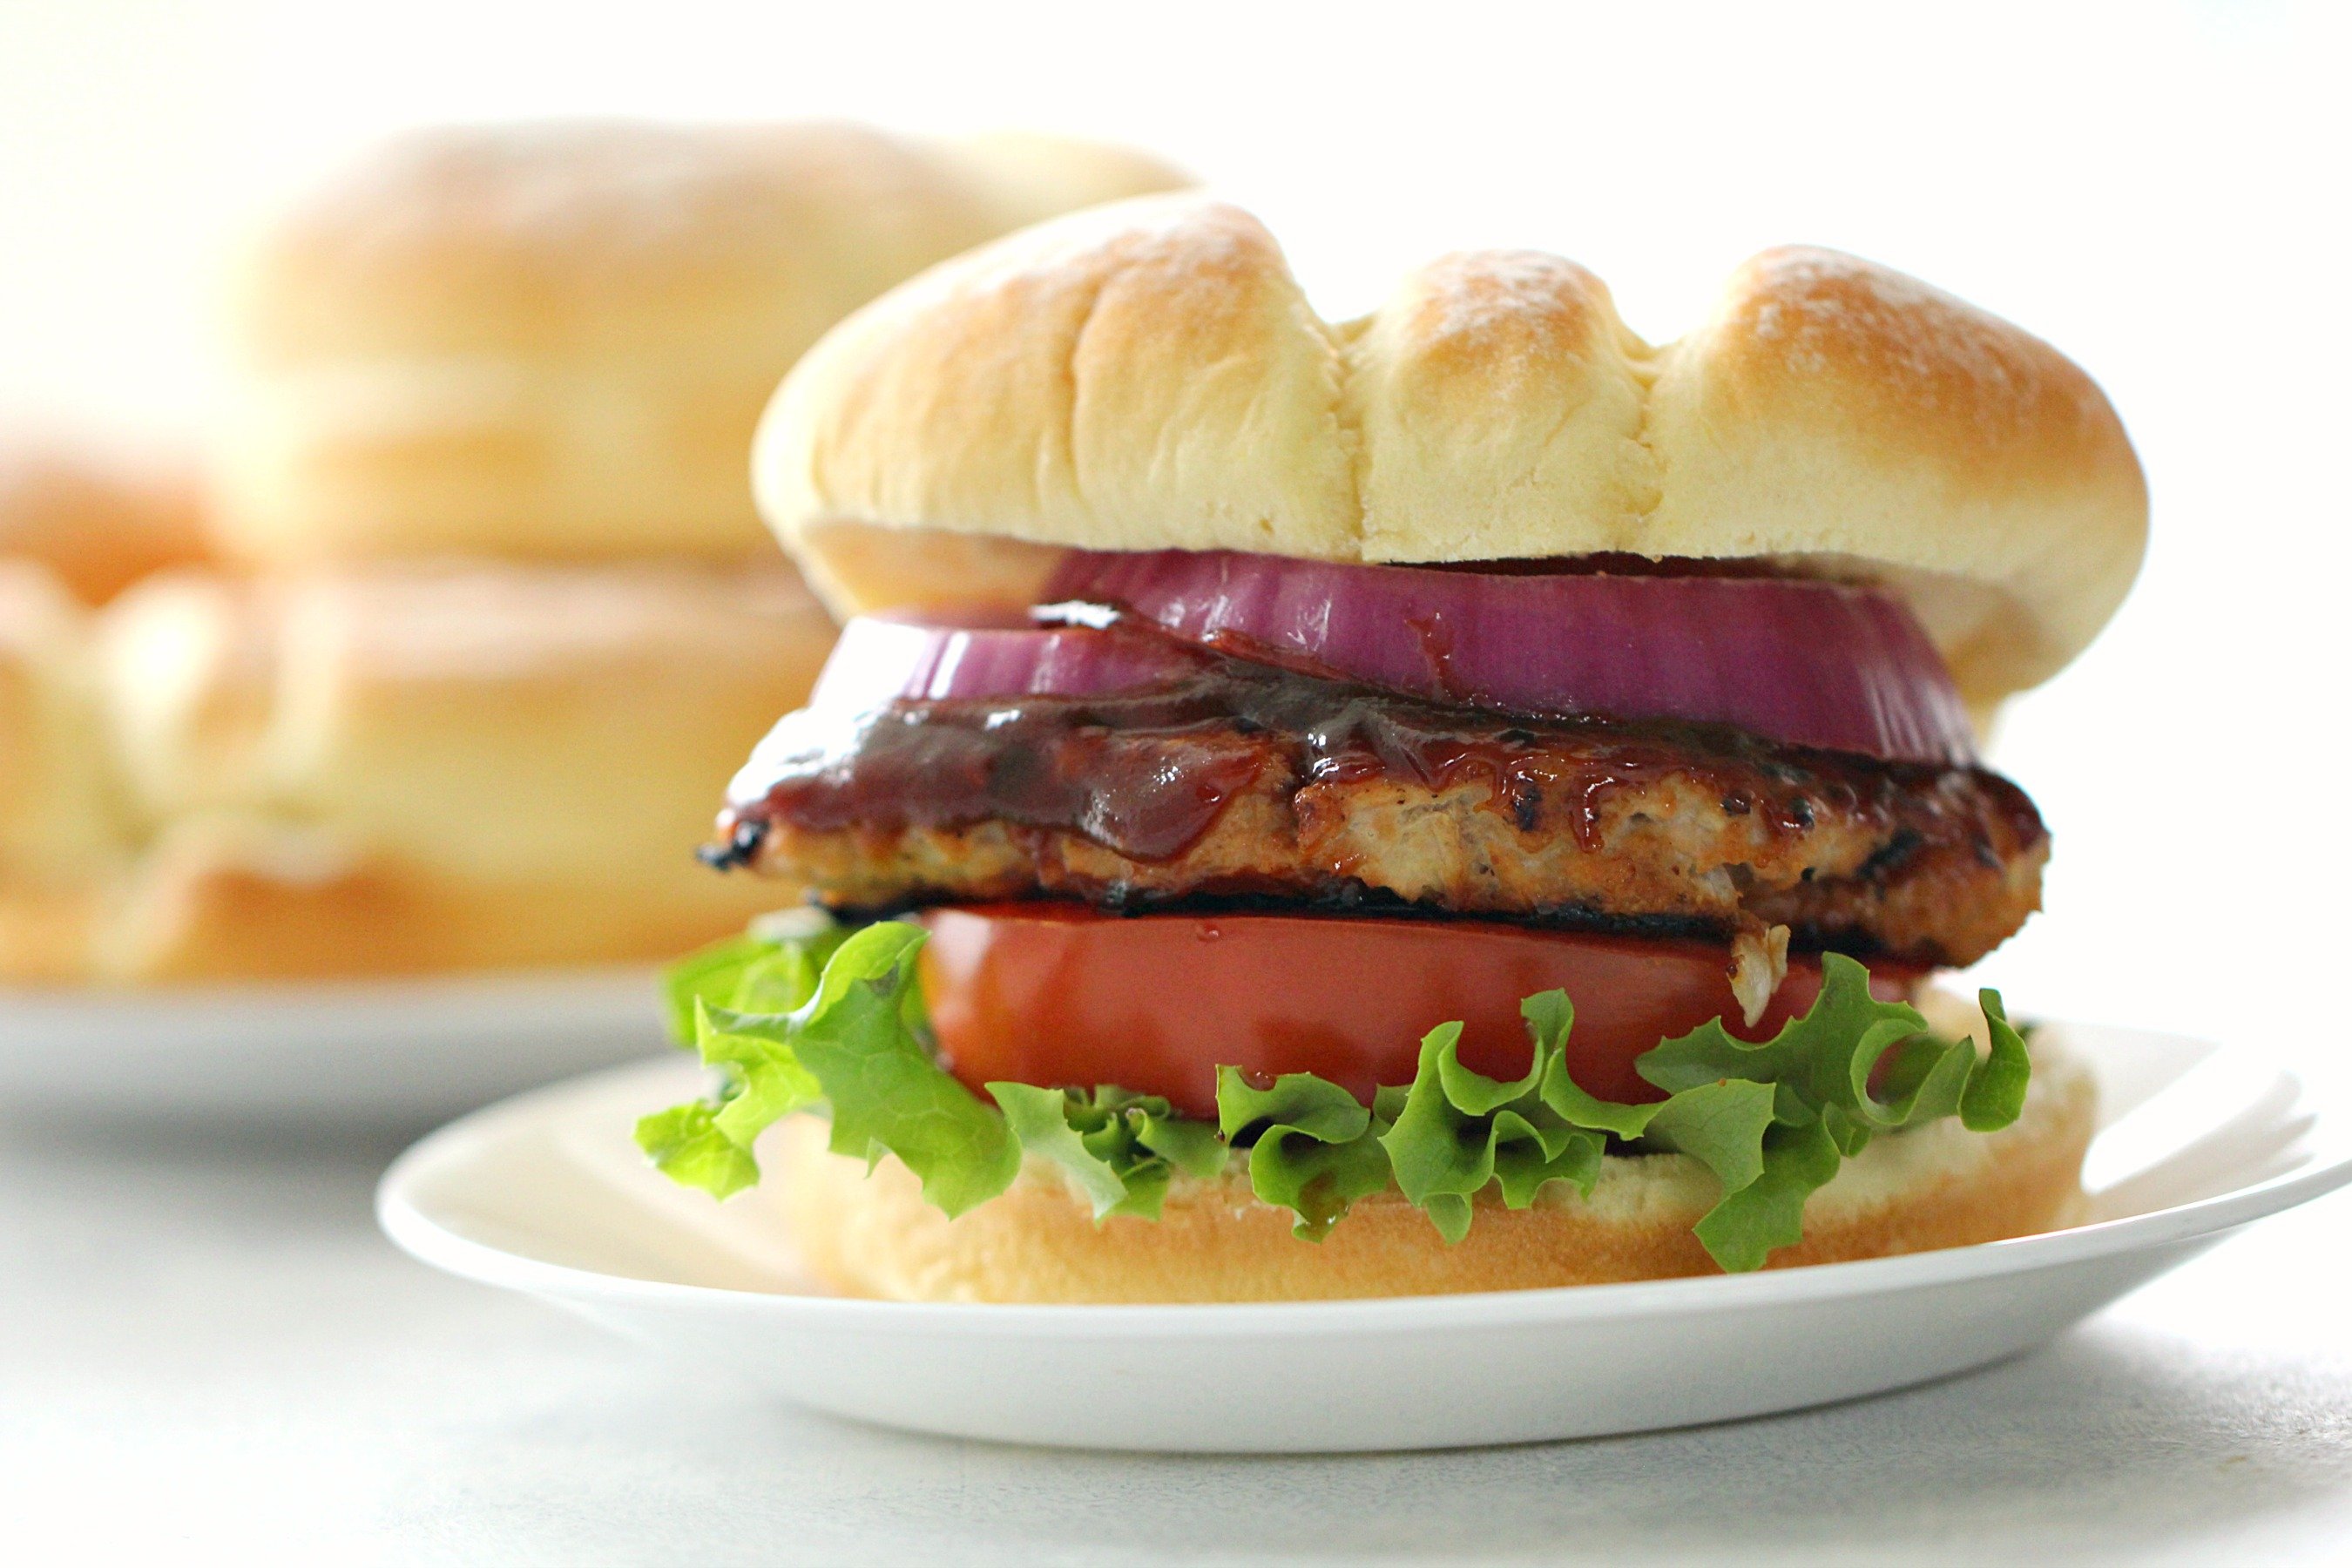 BBQ Turkey Burger with bun and toppings served on a white plate